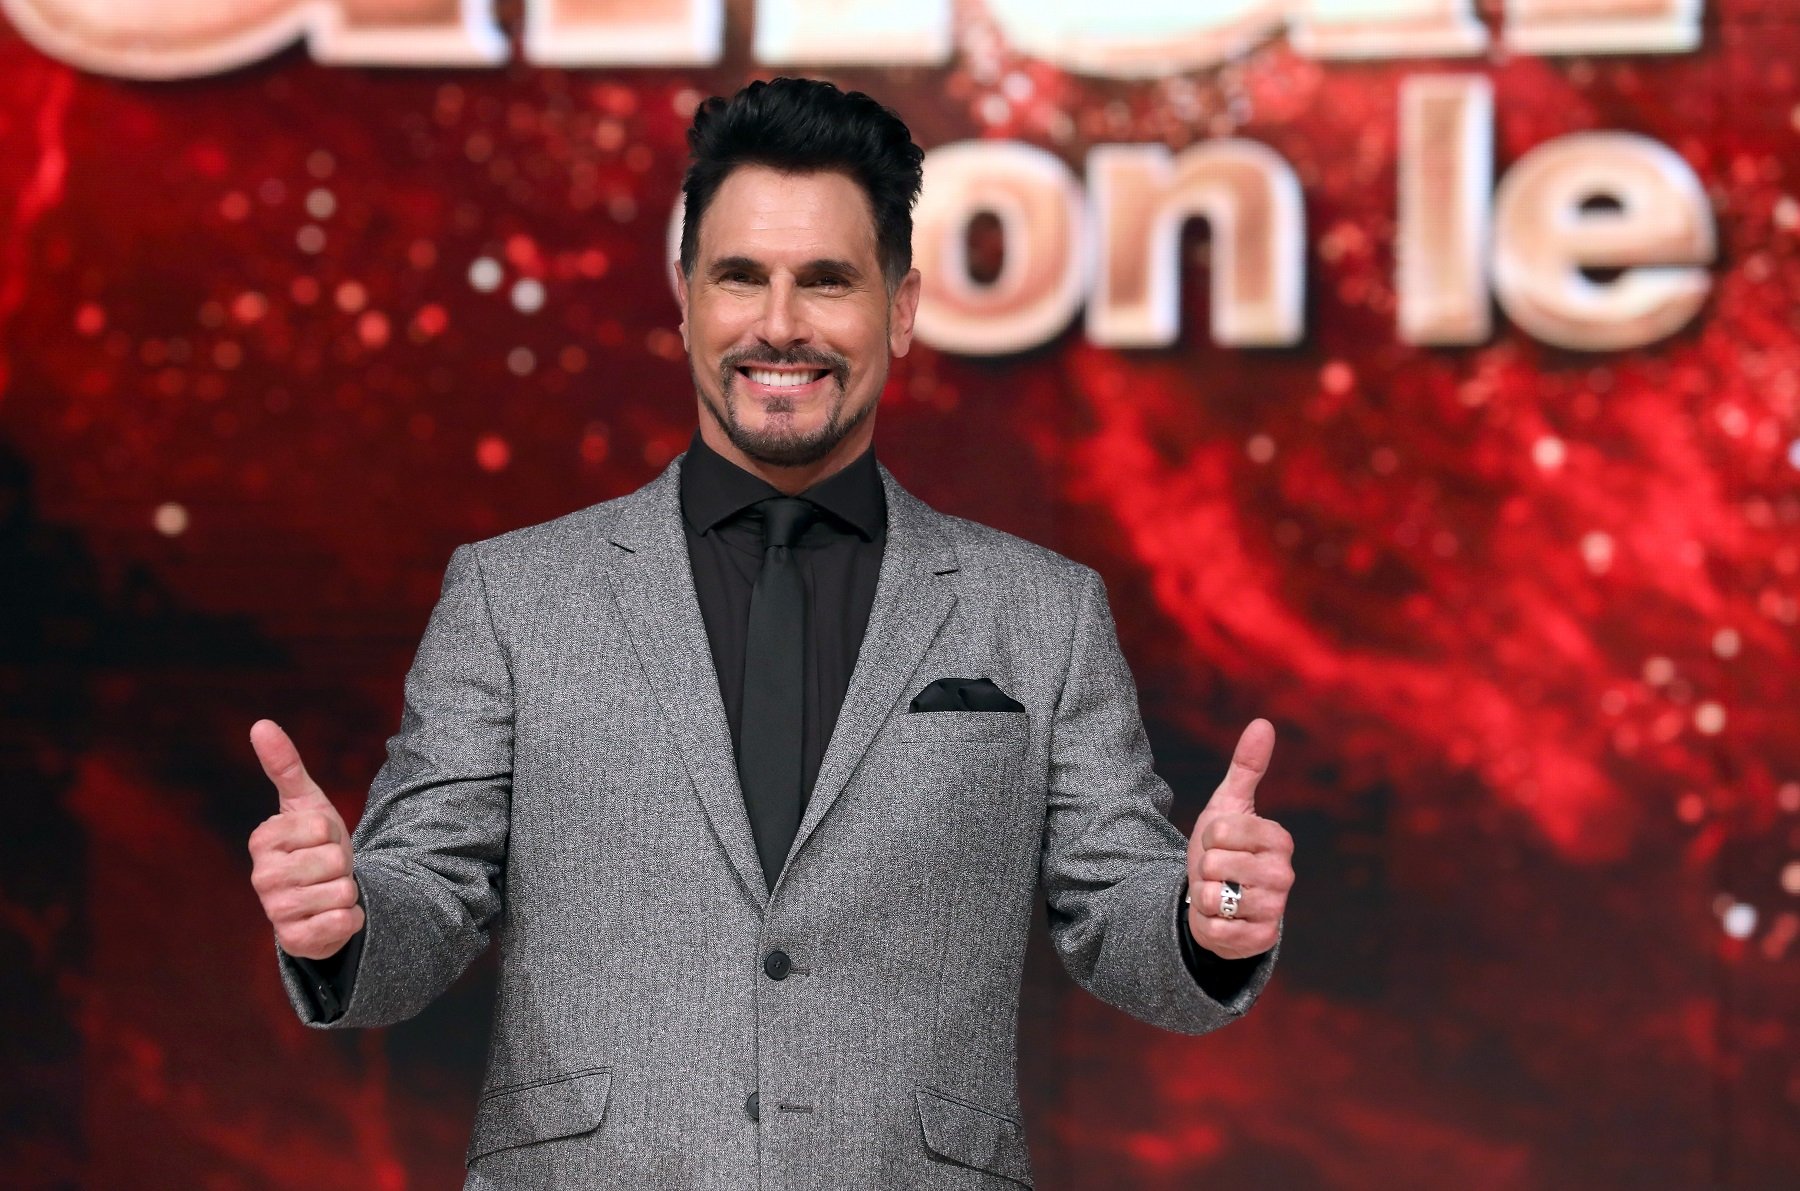 The Bold and the Beautiful star Don Diamont, pictured here in a grey suit